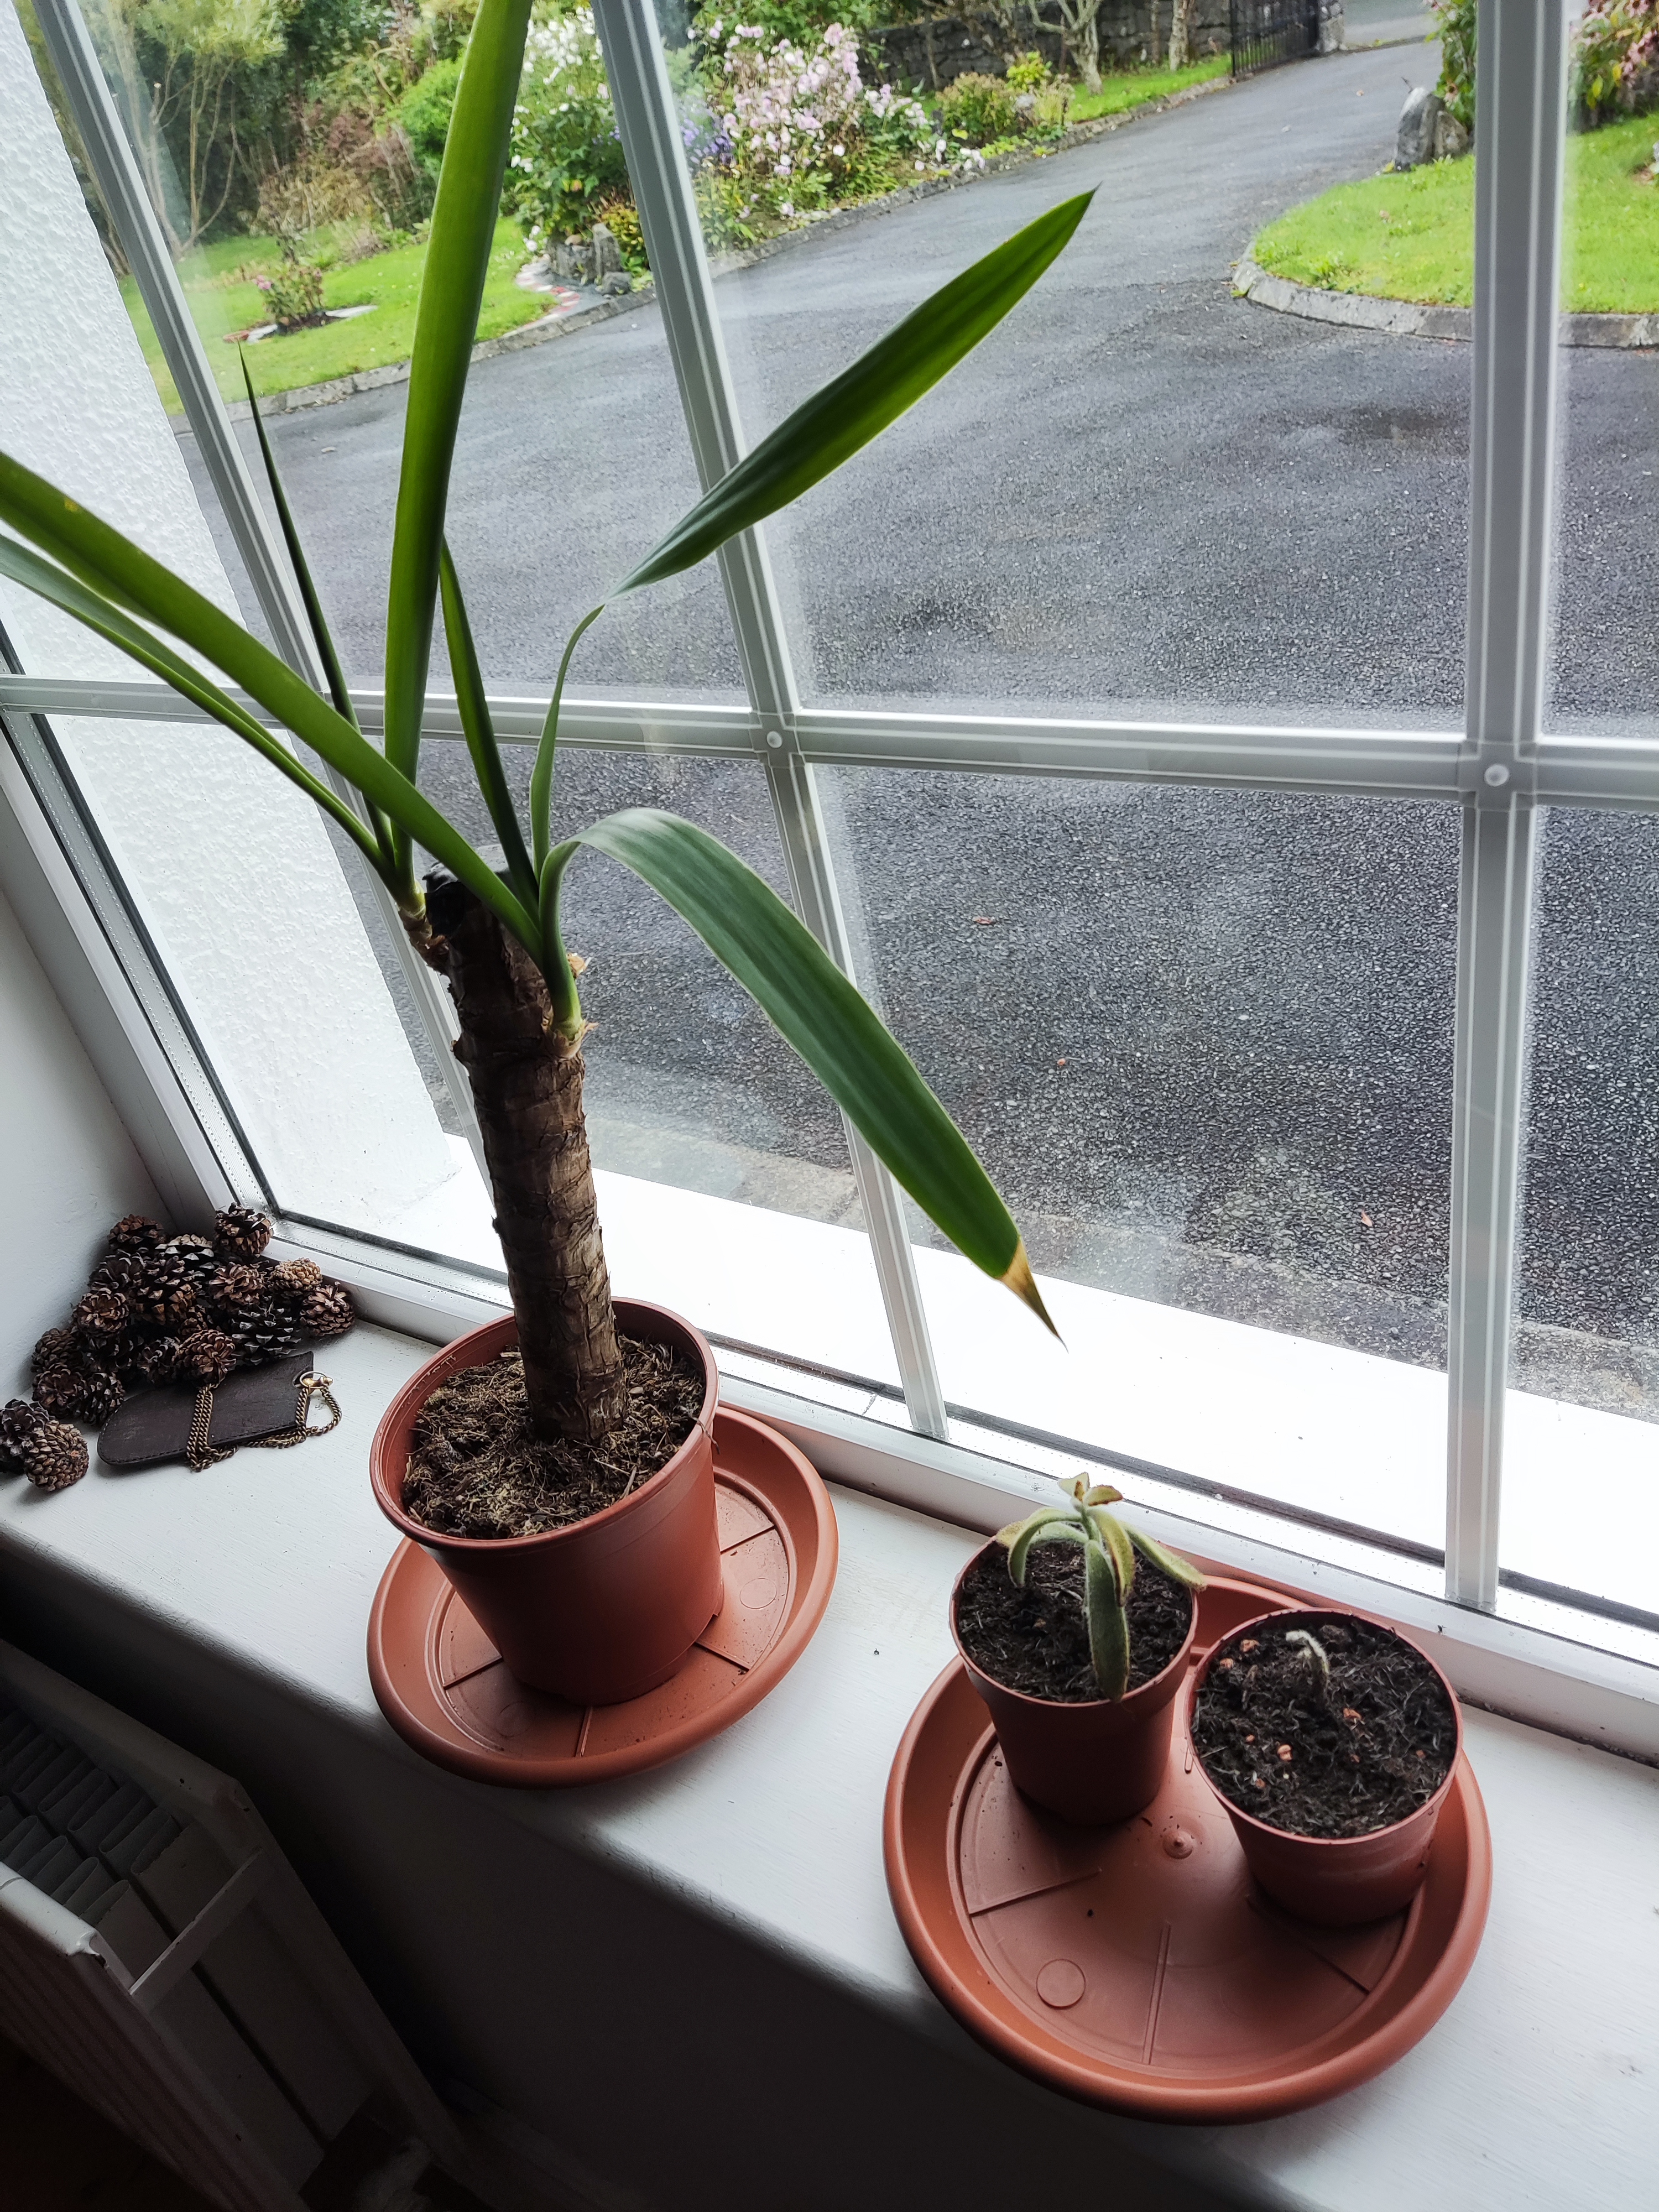 Yucca and panda plant on the window sill